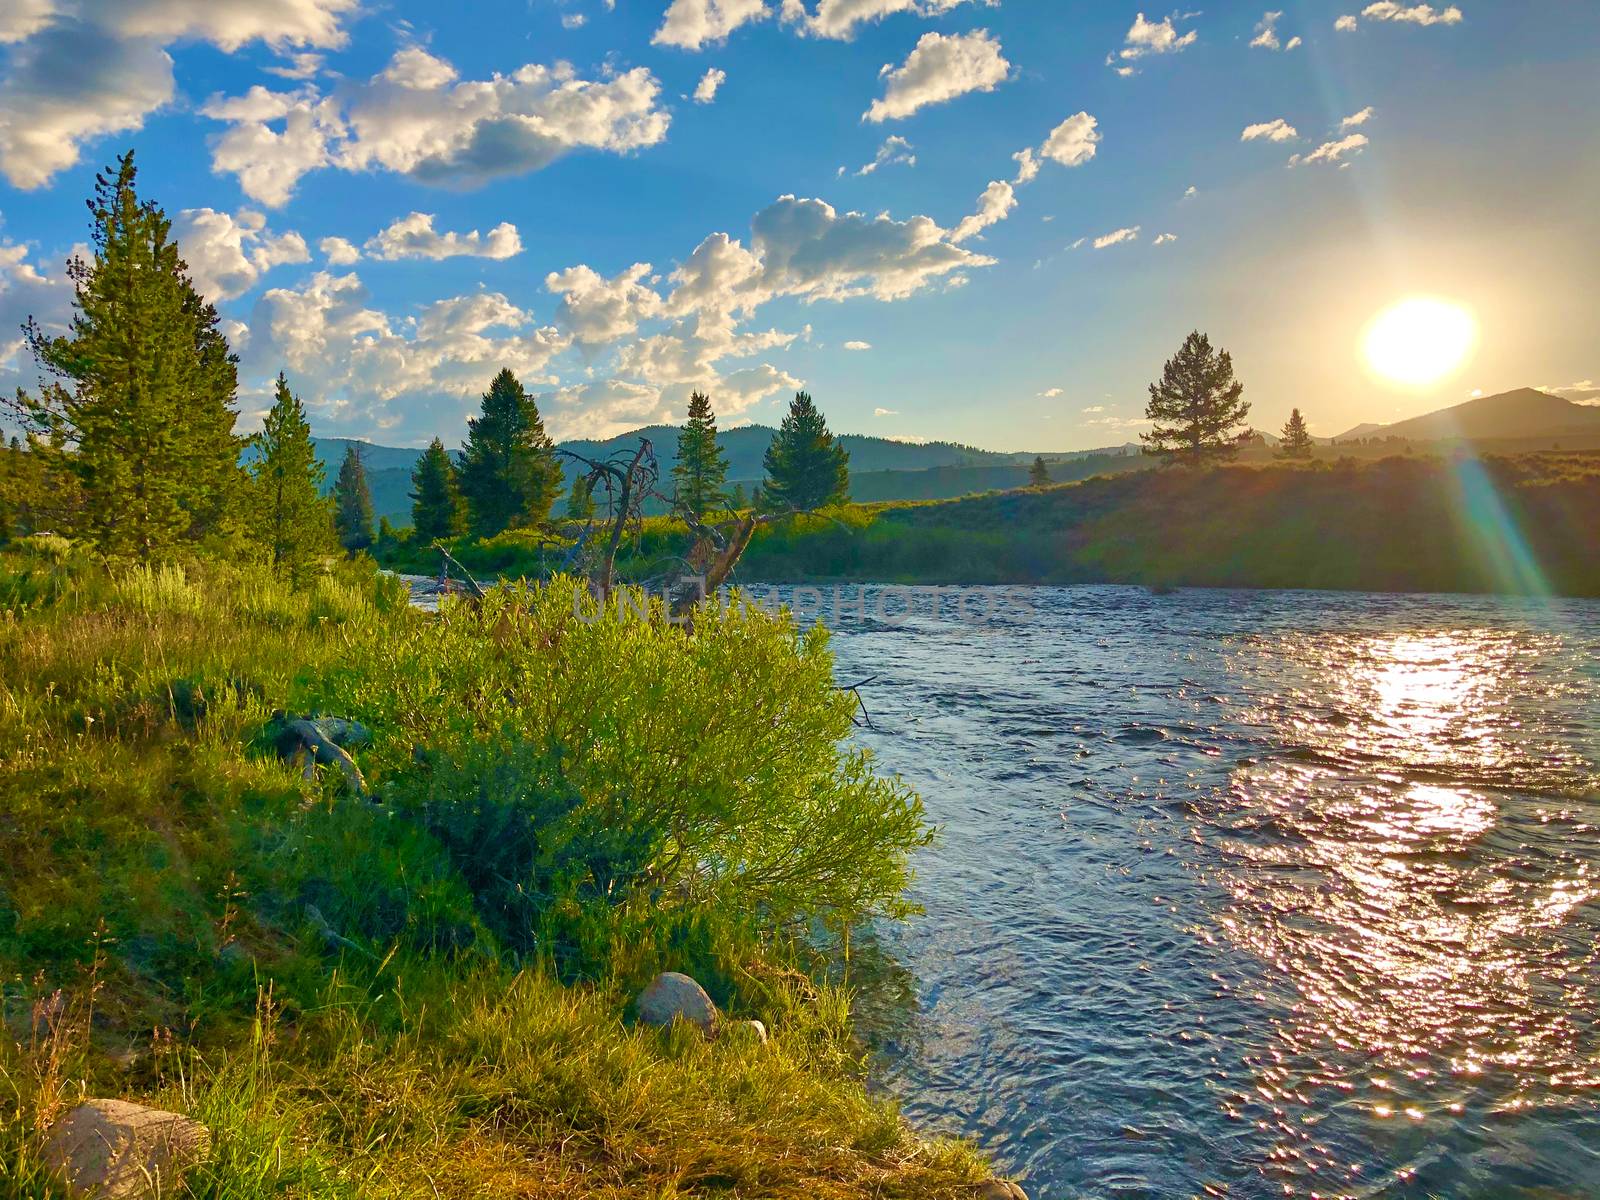 Sunset on the Salmon River near Stanley Idaho. by patrickstock